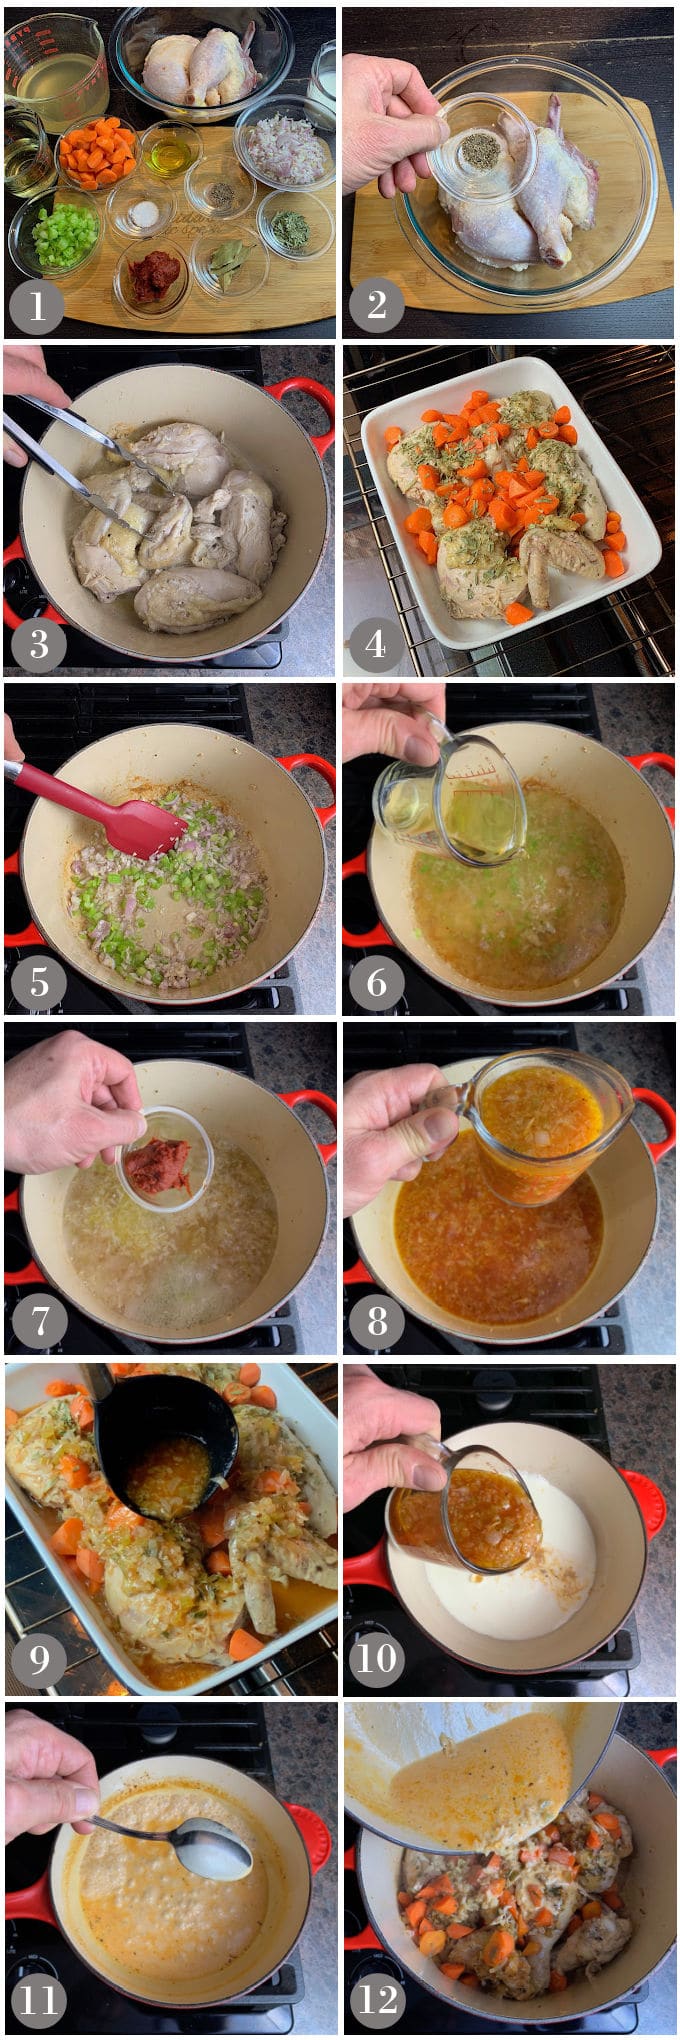 A collage of photos showing the steps to make chicken tarragon.